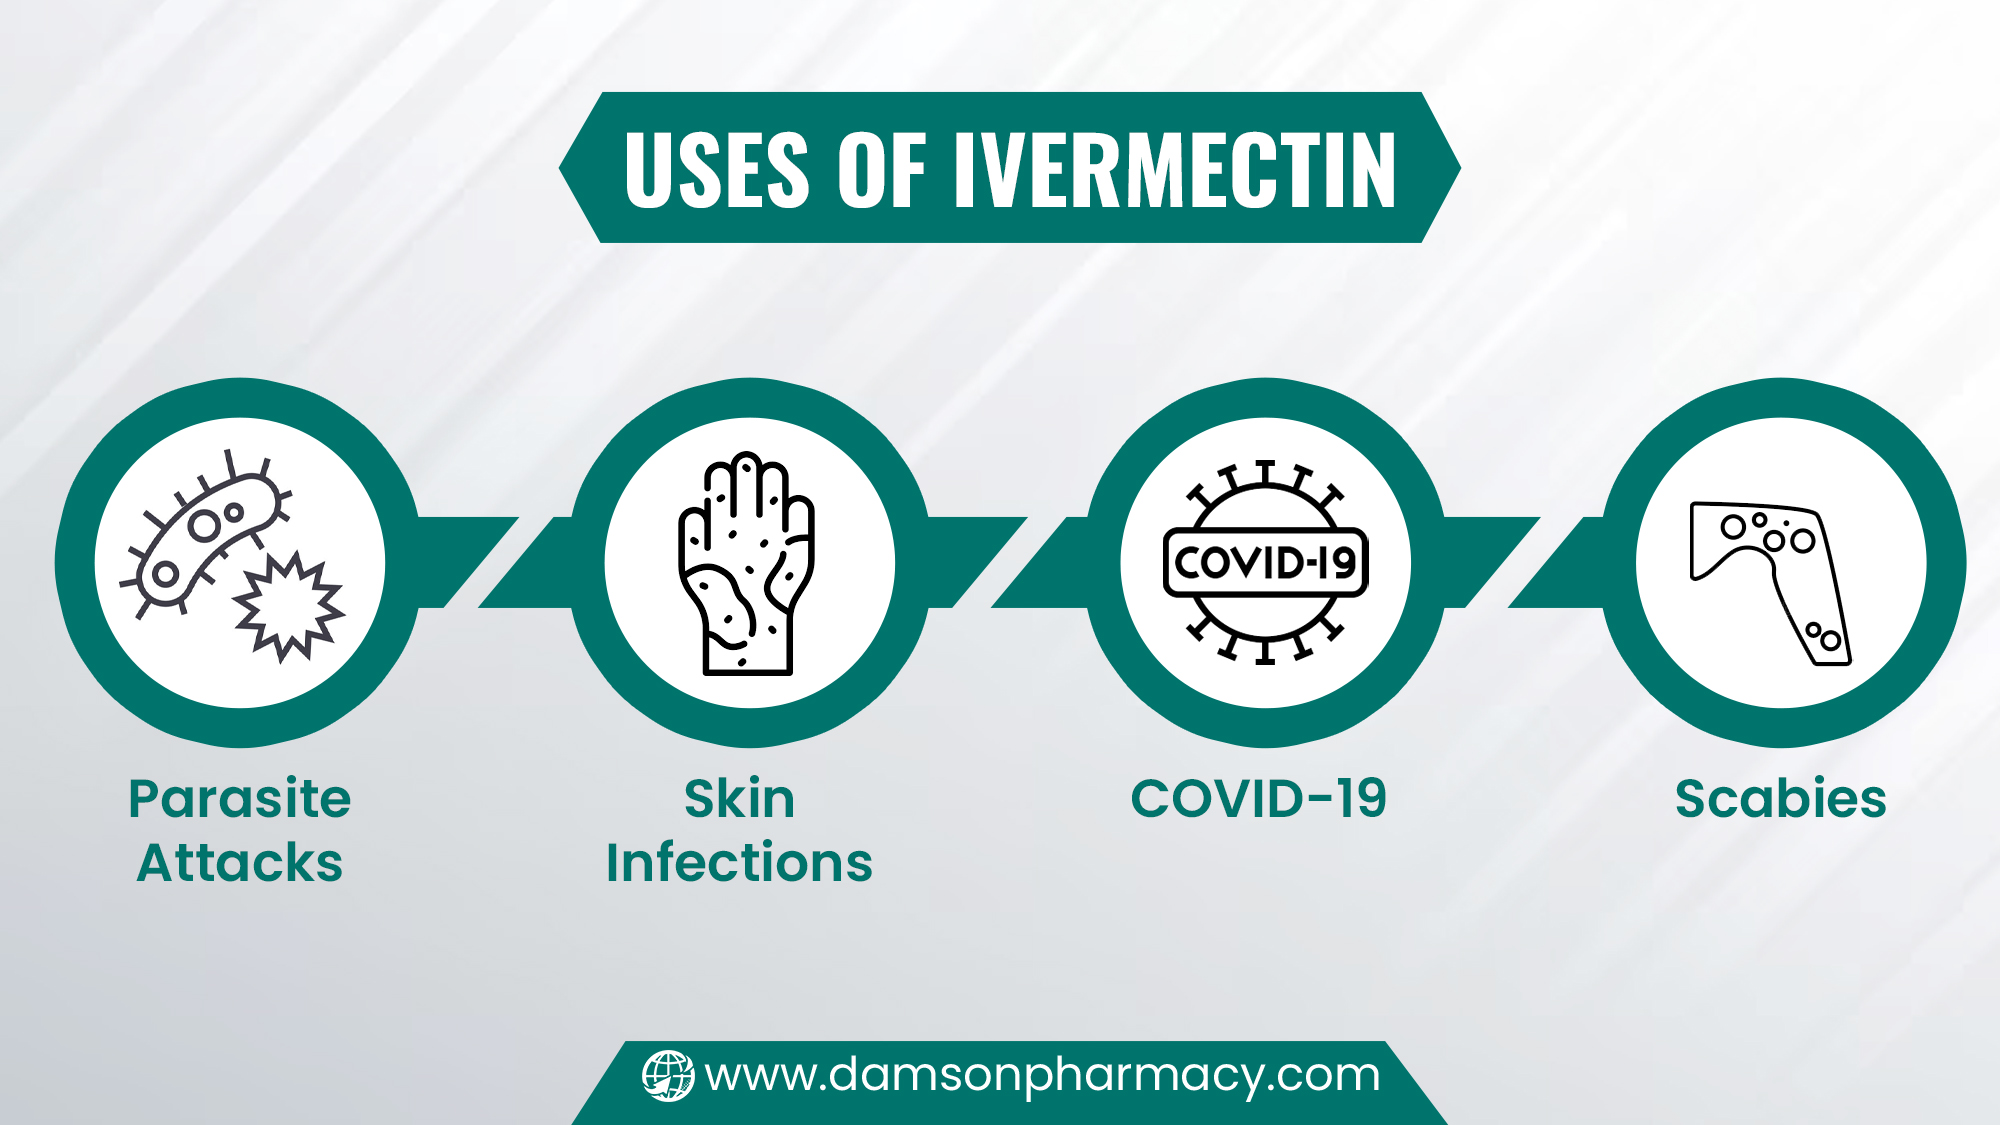 Uses of Ivermectin